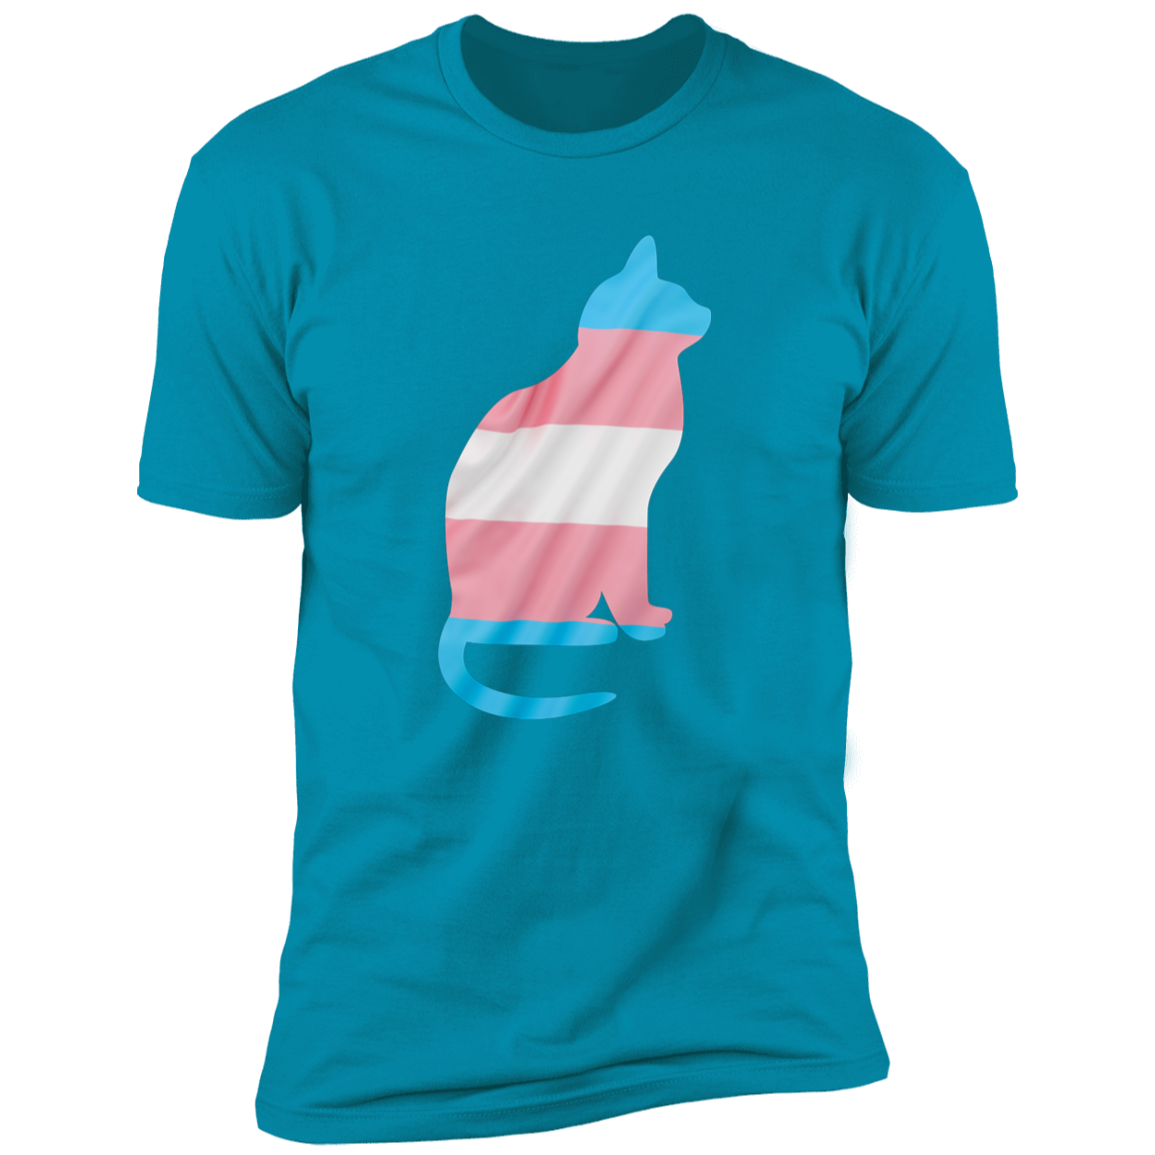 Trans Pride Cat Pride T-shirt, Trans Pride Cat Shirt for humans, in turquoise